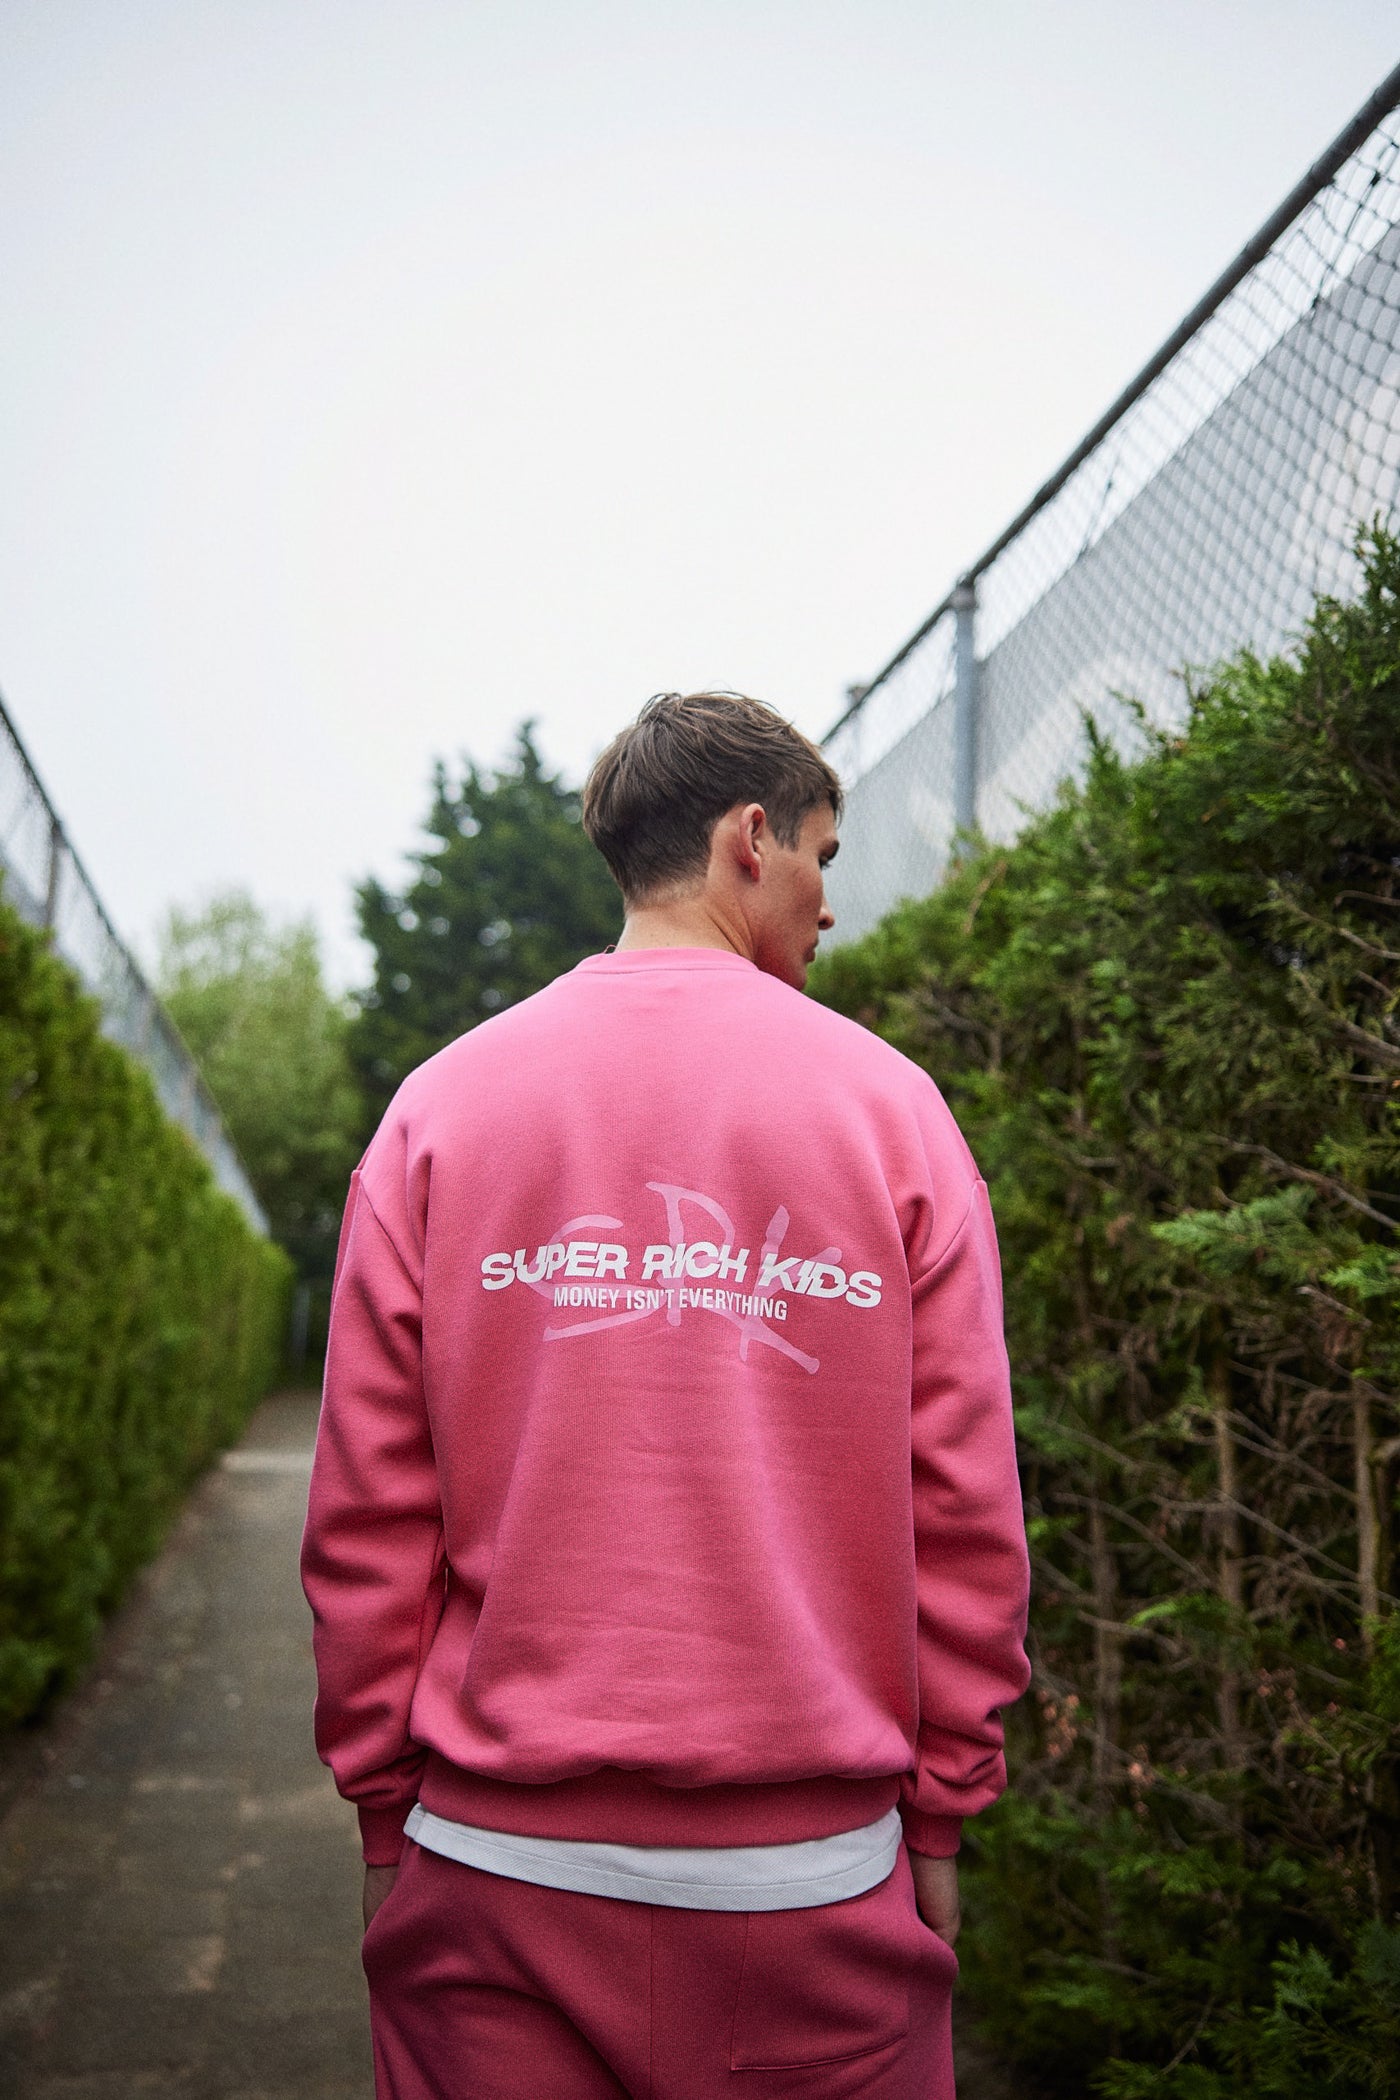 Tracksuit Hot Pink 'Money isn't Everything'